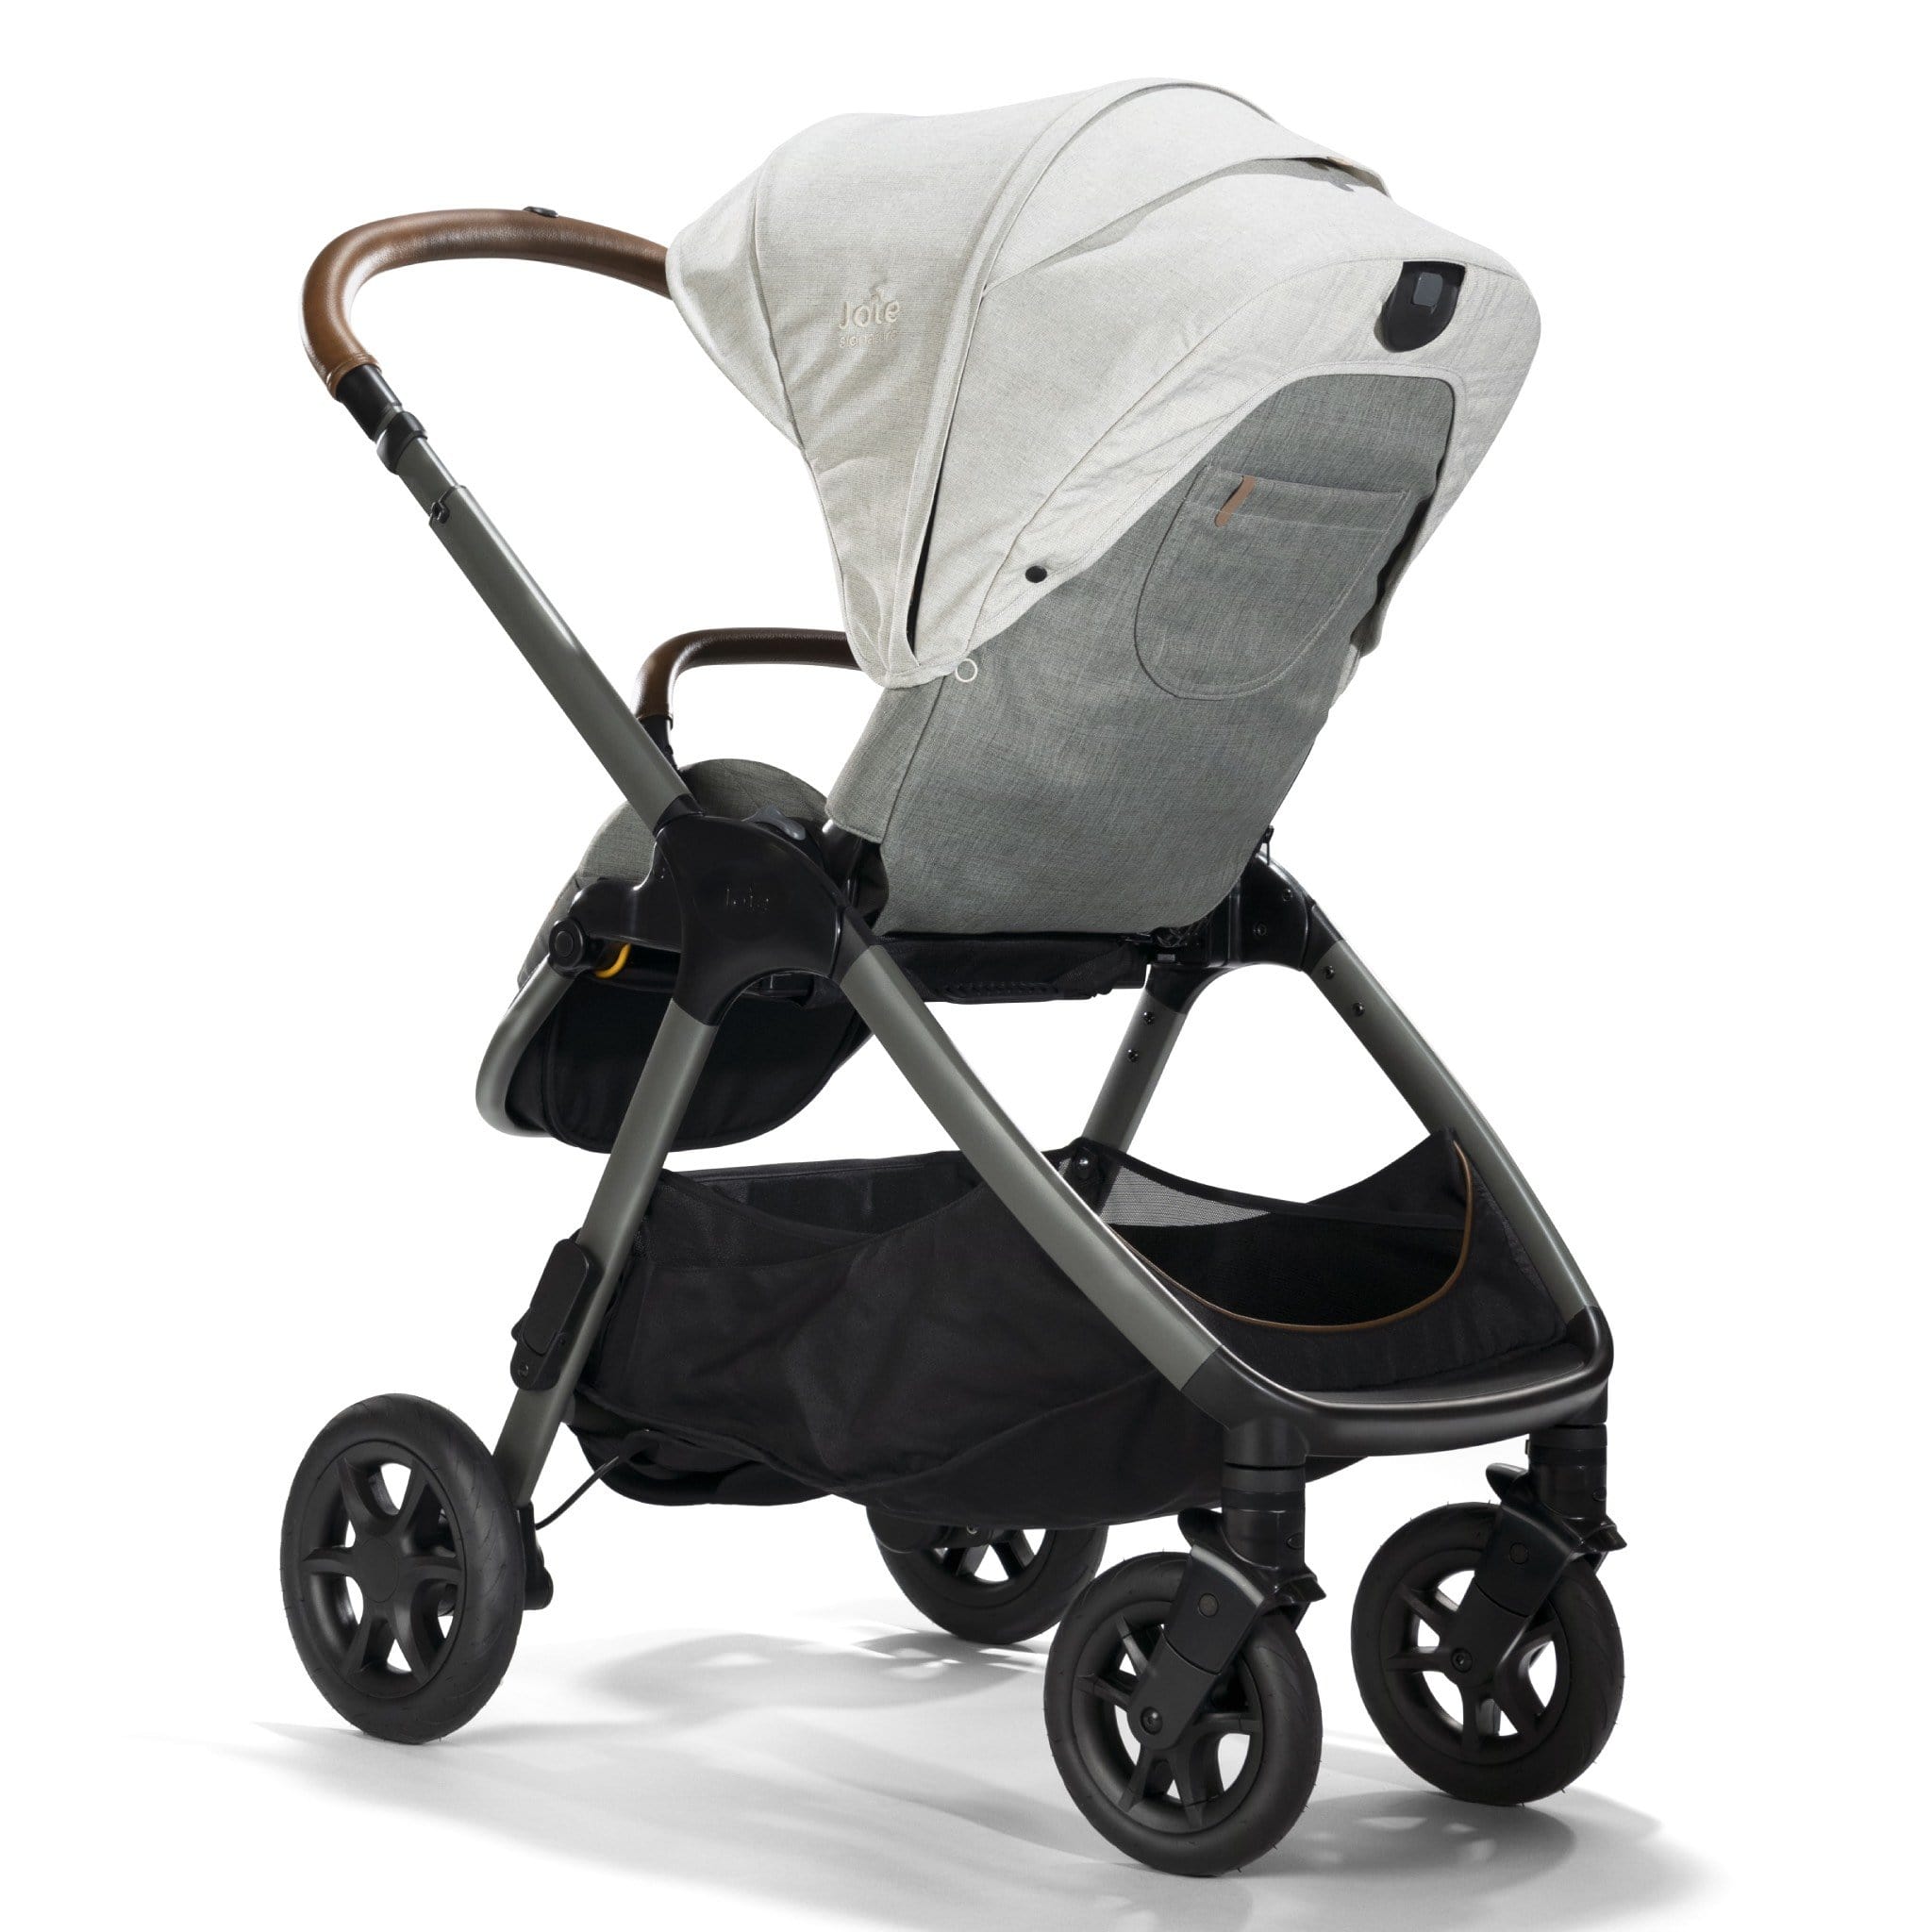 Joie baby prams Joie Finiti 4in1 Signature Edition Pram Oyster S1606AAOYS000